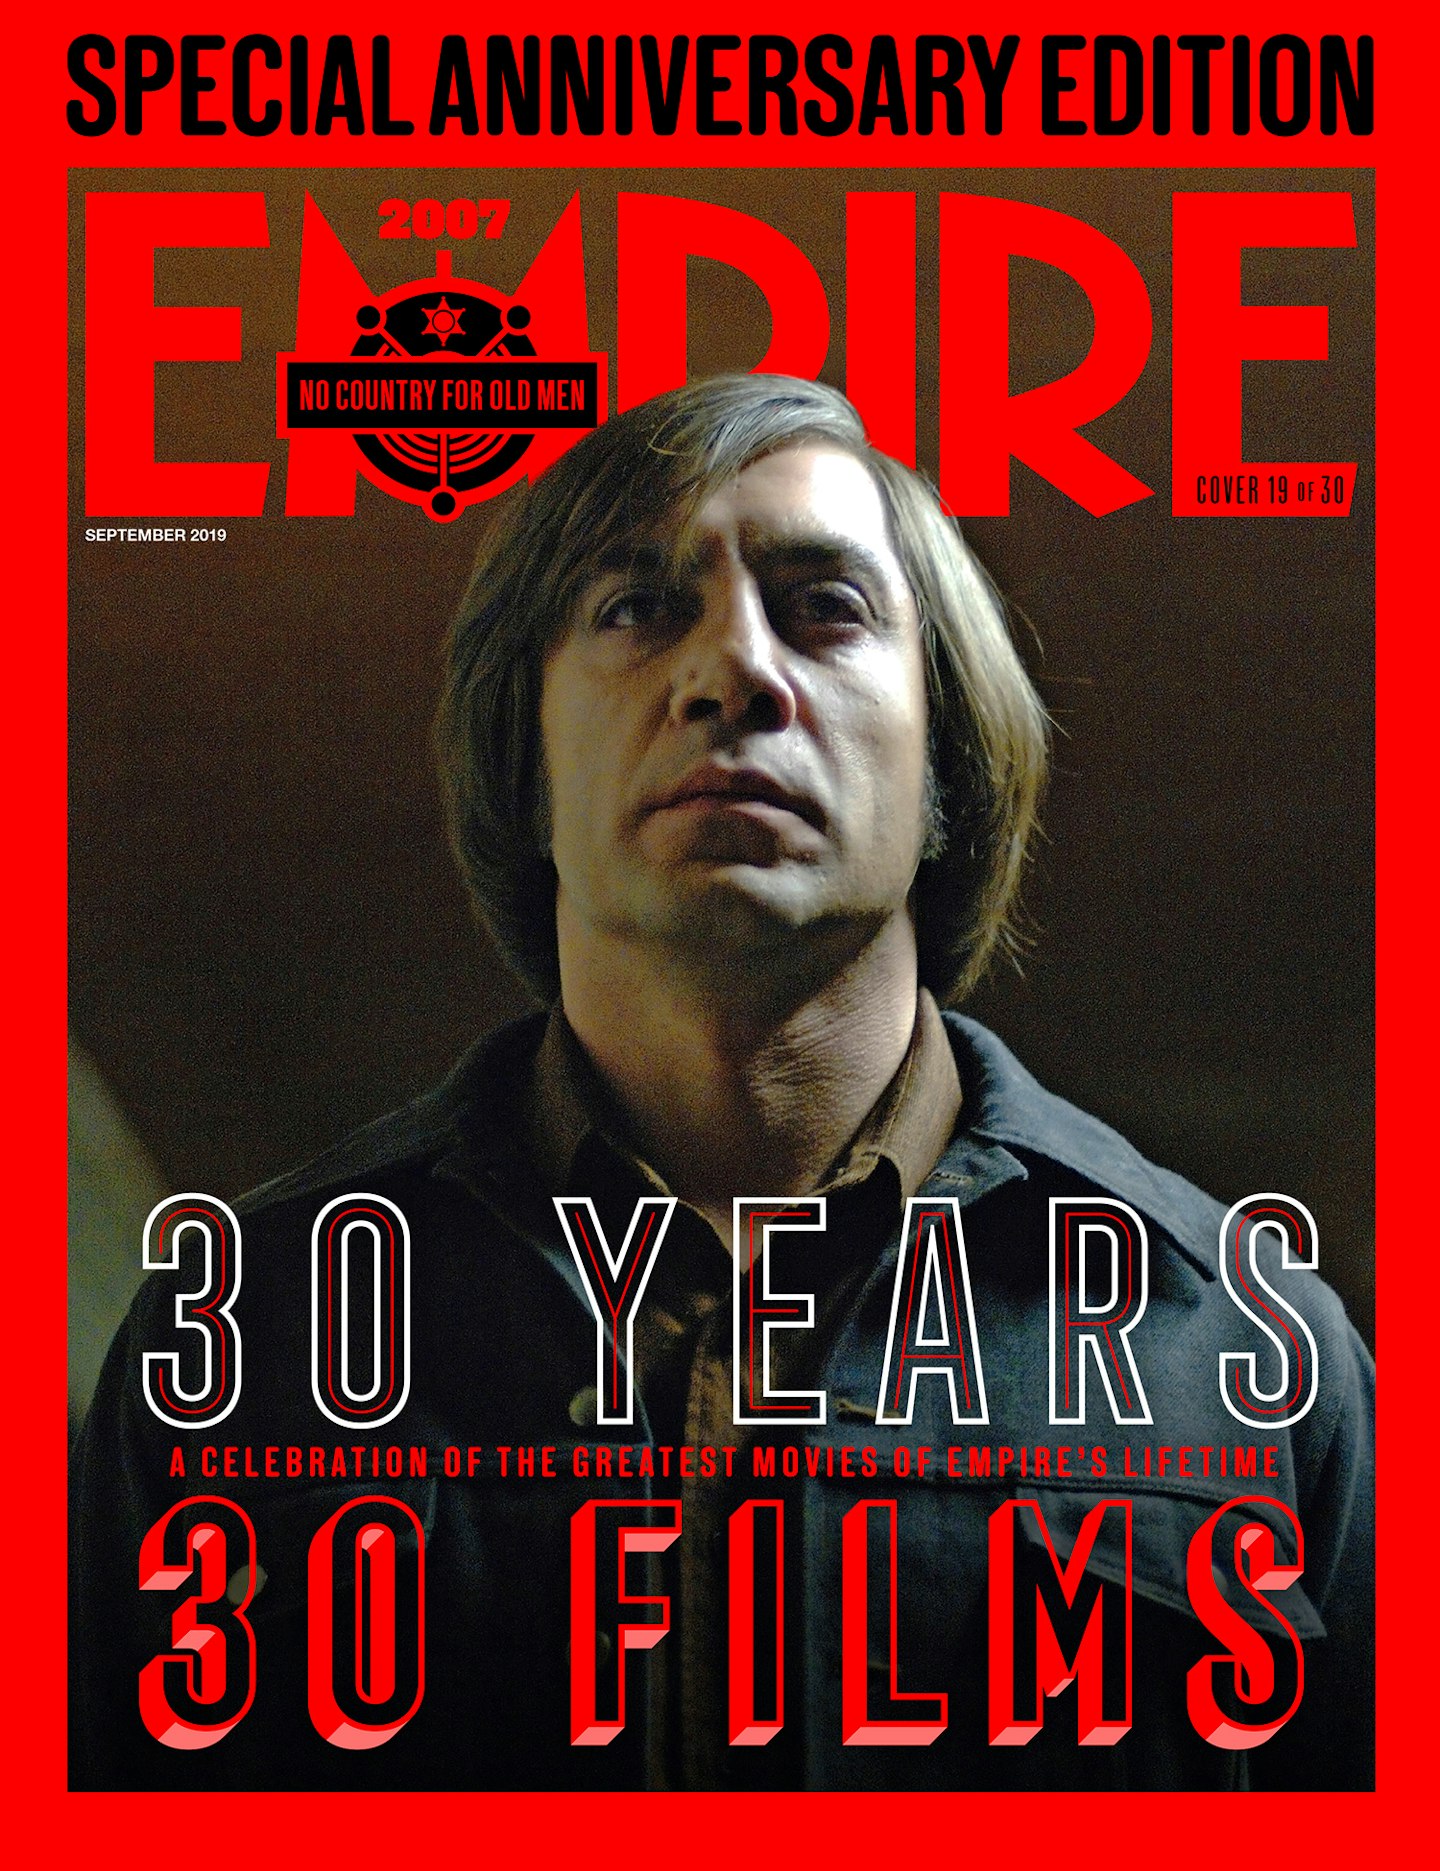 Empire's 30th Anniversary Edition Covers – No Country For Old Men